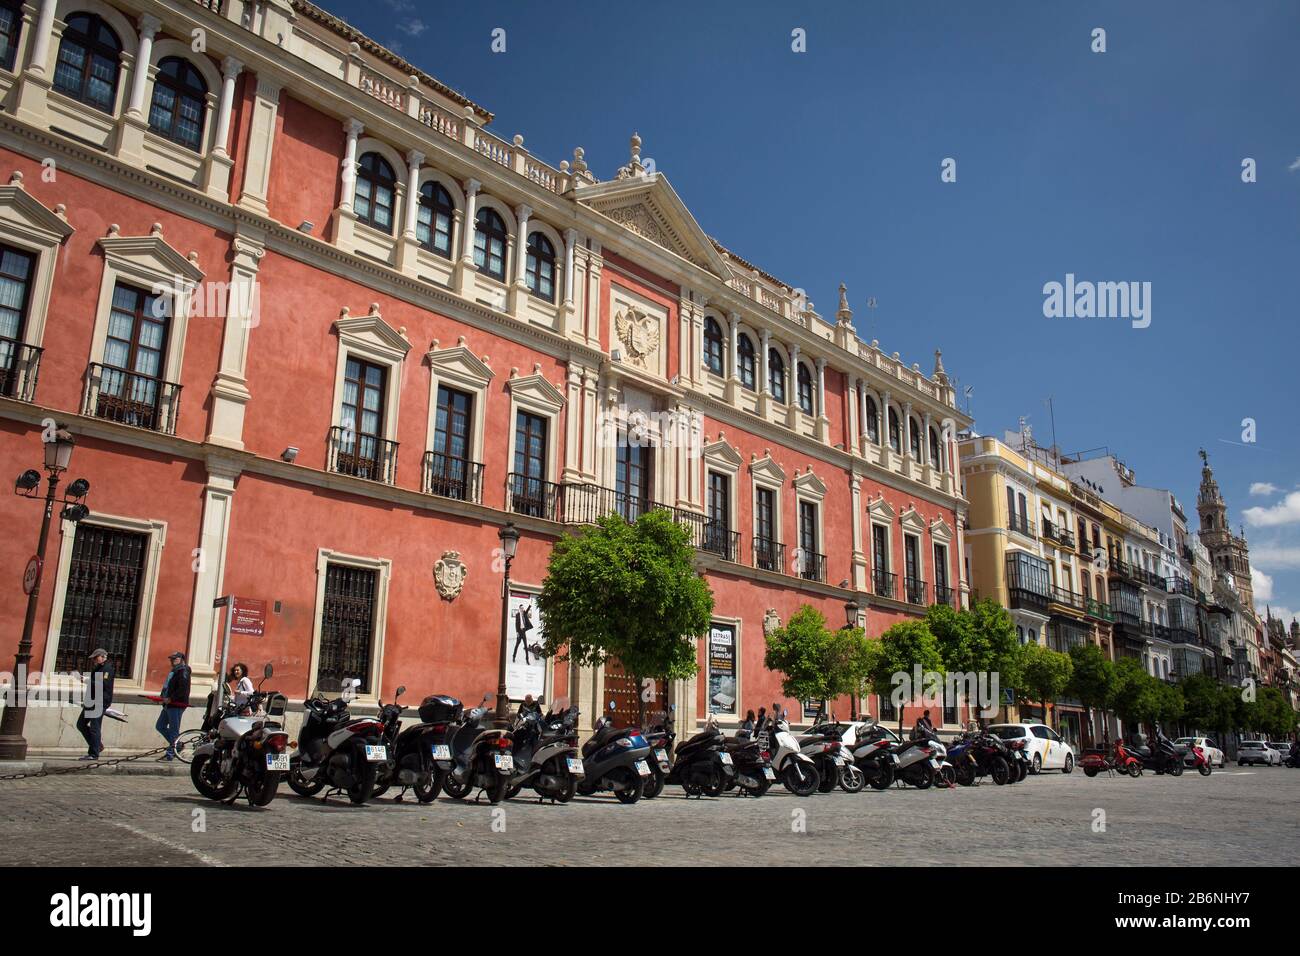 Motorbikes parked next to the Cajasol Foundation Headquarters, former Audience building, at San Francisco Square, Seville, Spain Stock Photo